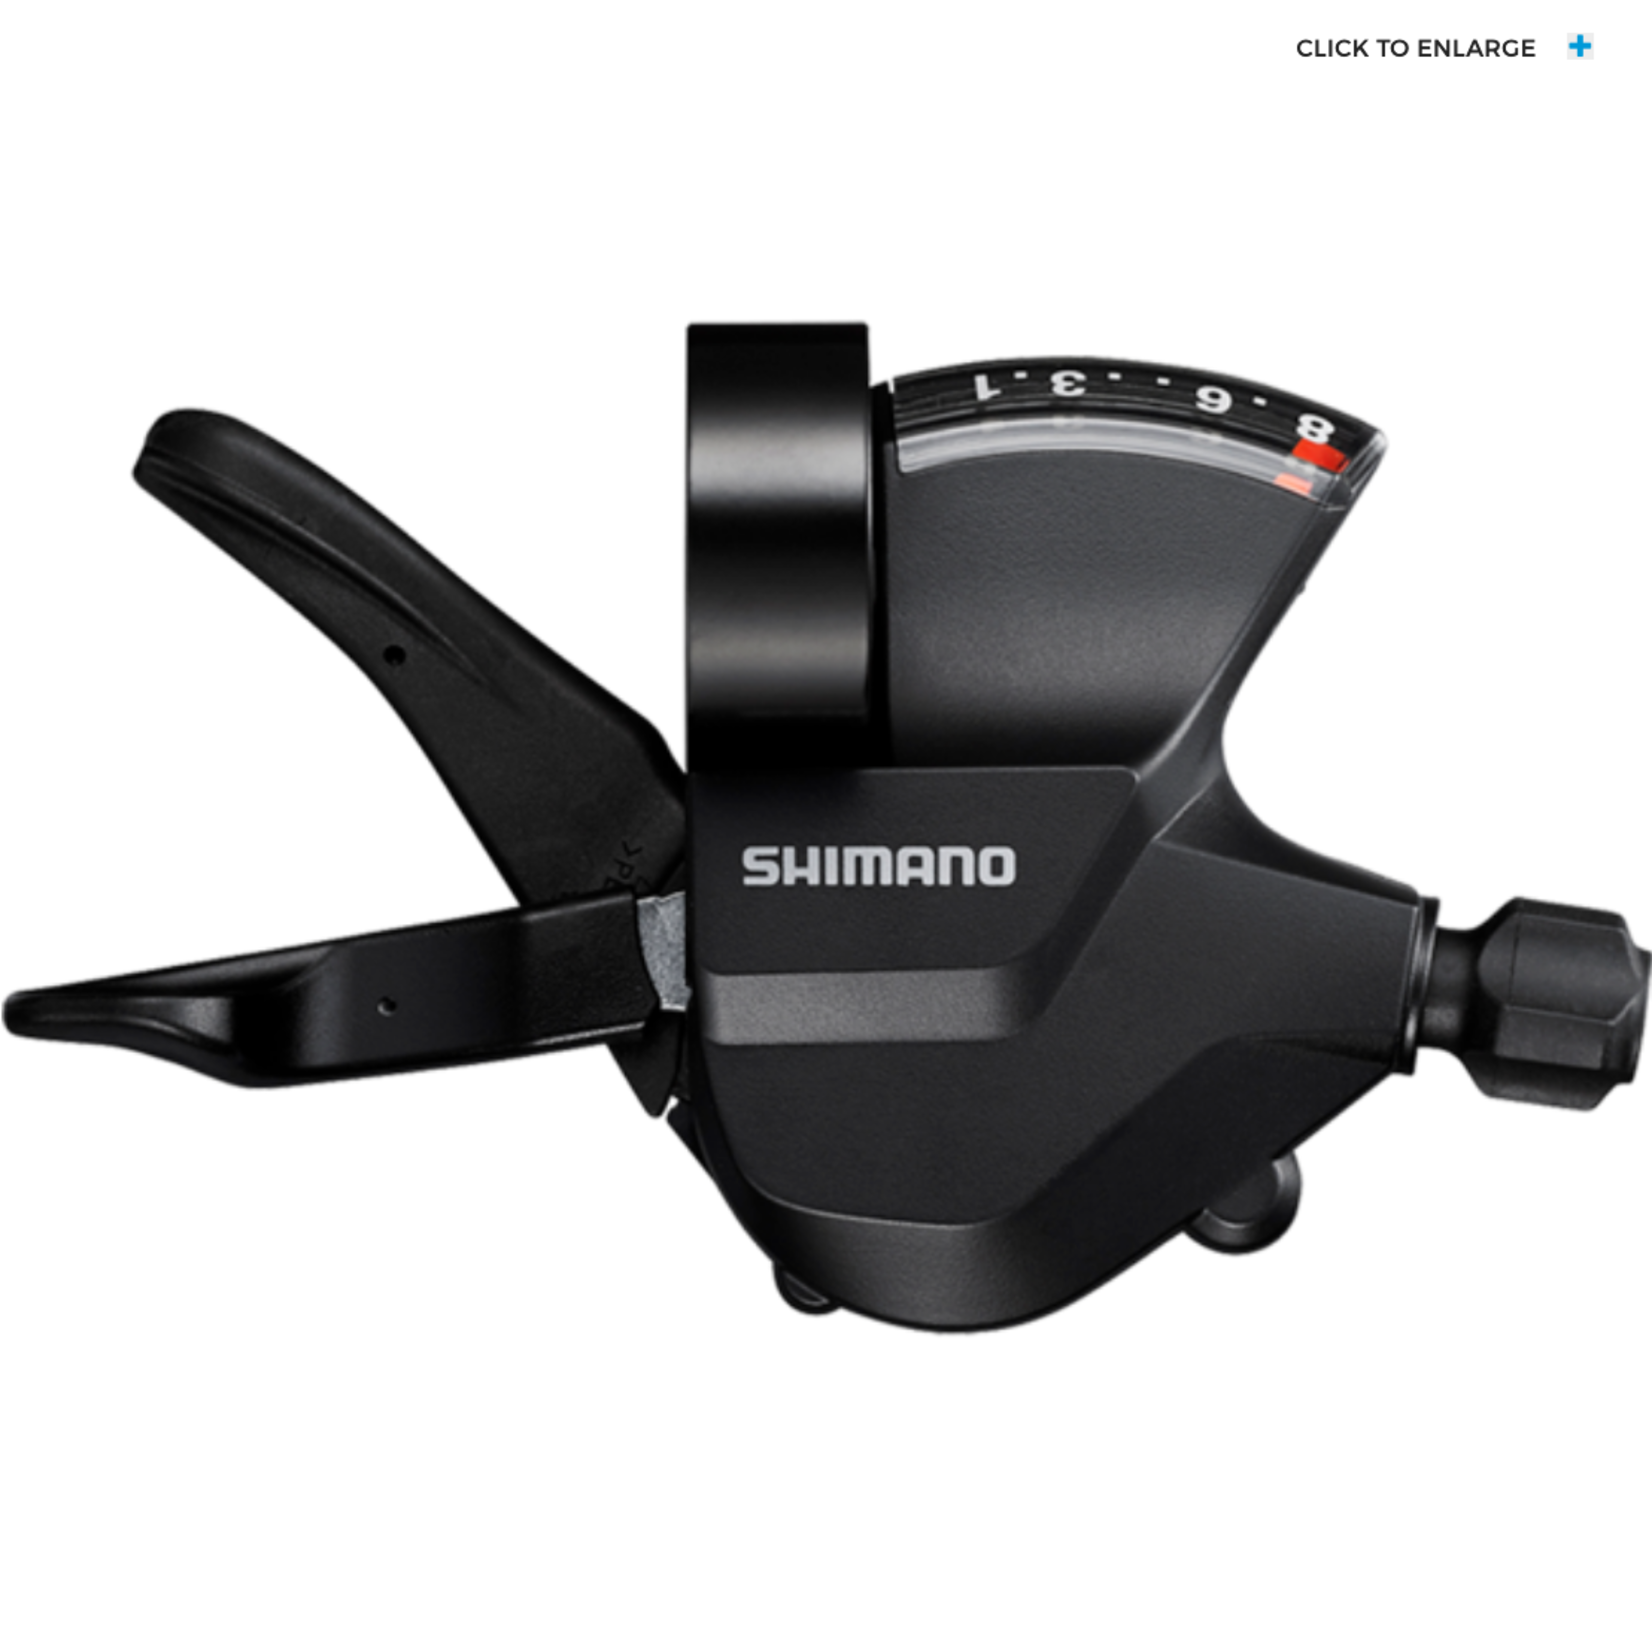 Shimano SHIFT LEVER, SL-M315-8R, RIGHT, 8-SPEED RAPIDFIRE PLUS, W/ OPTICAL GEAR DISPLAY